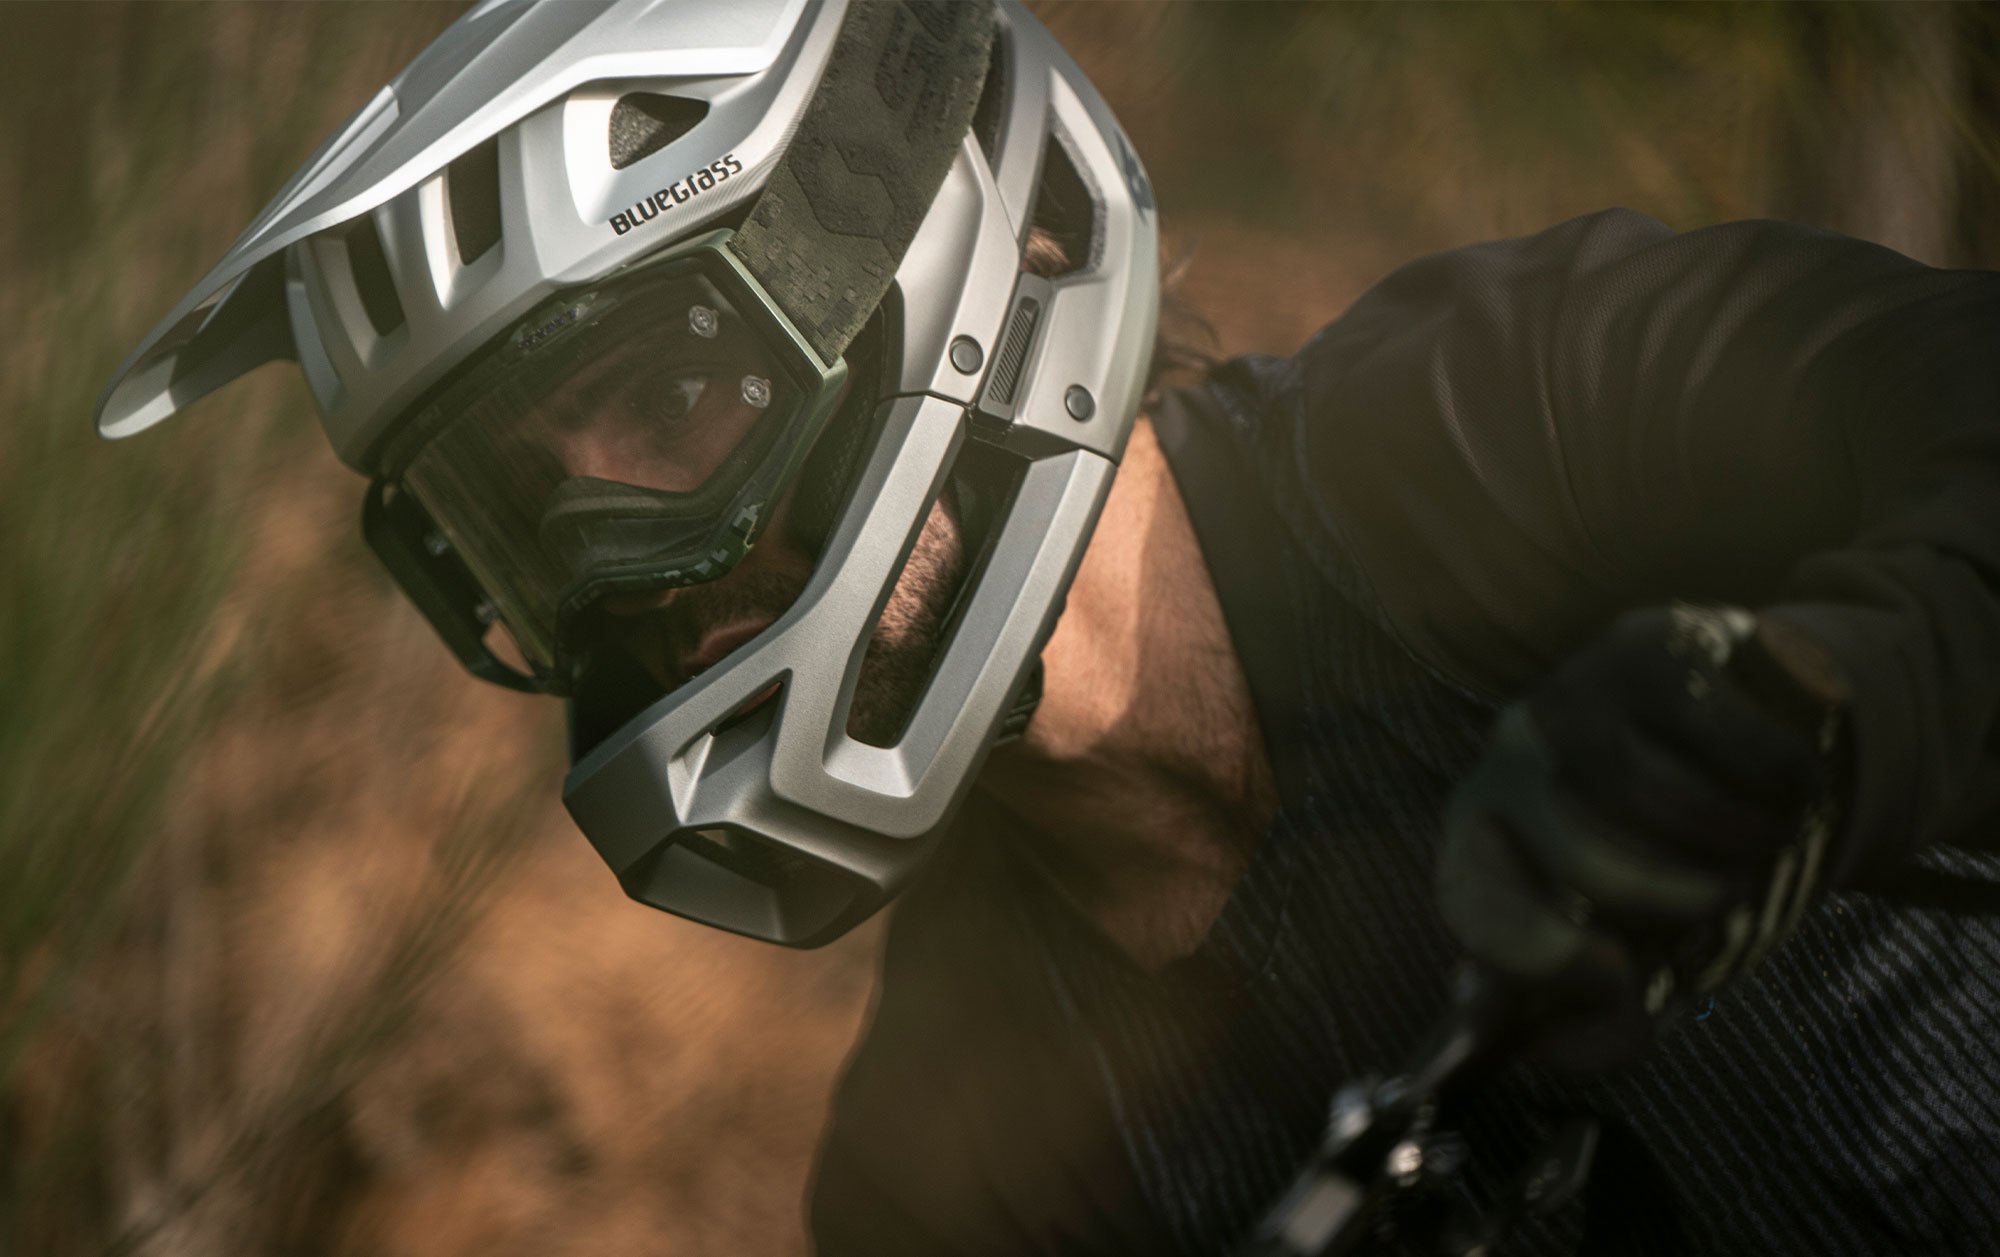 Bluegrass Vanguard is a Full-Face MTB Helmet designed for Enduro, Trail and E-MTB with unique C-Shaped cheekpads design for maximum ventilation